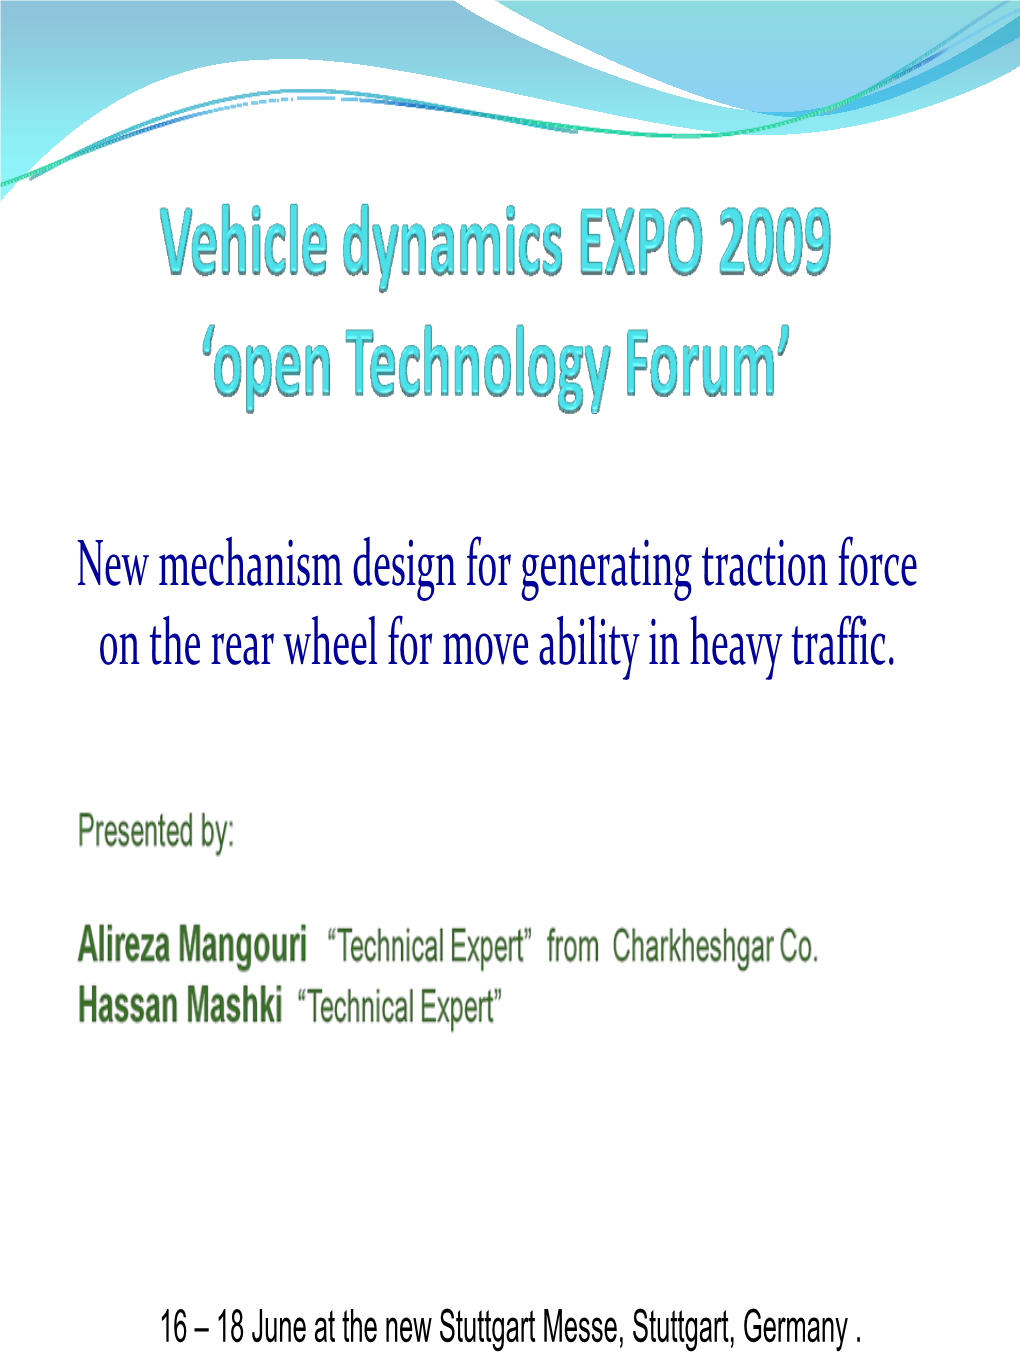 New Mechanism Design for Generating Traction Force on the Rear Wheel for Move Ability in Heavy Traffic